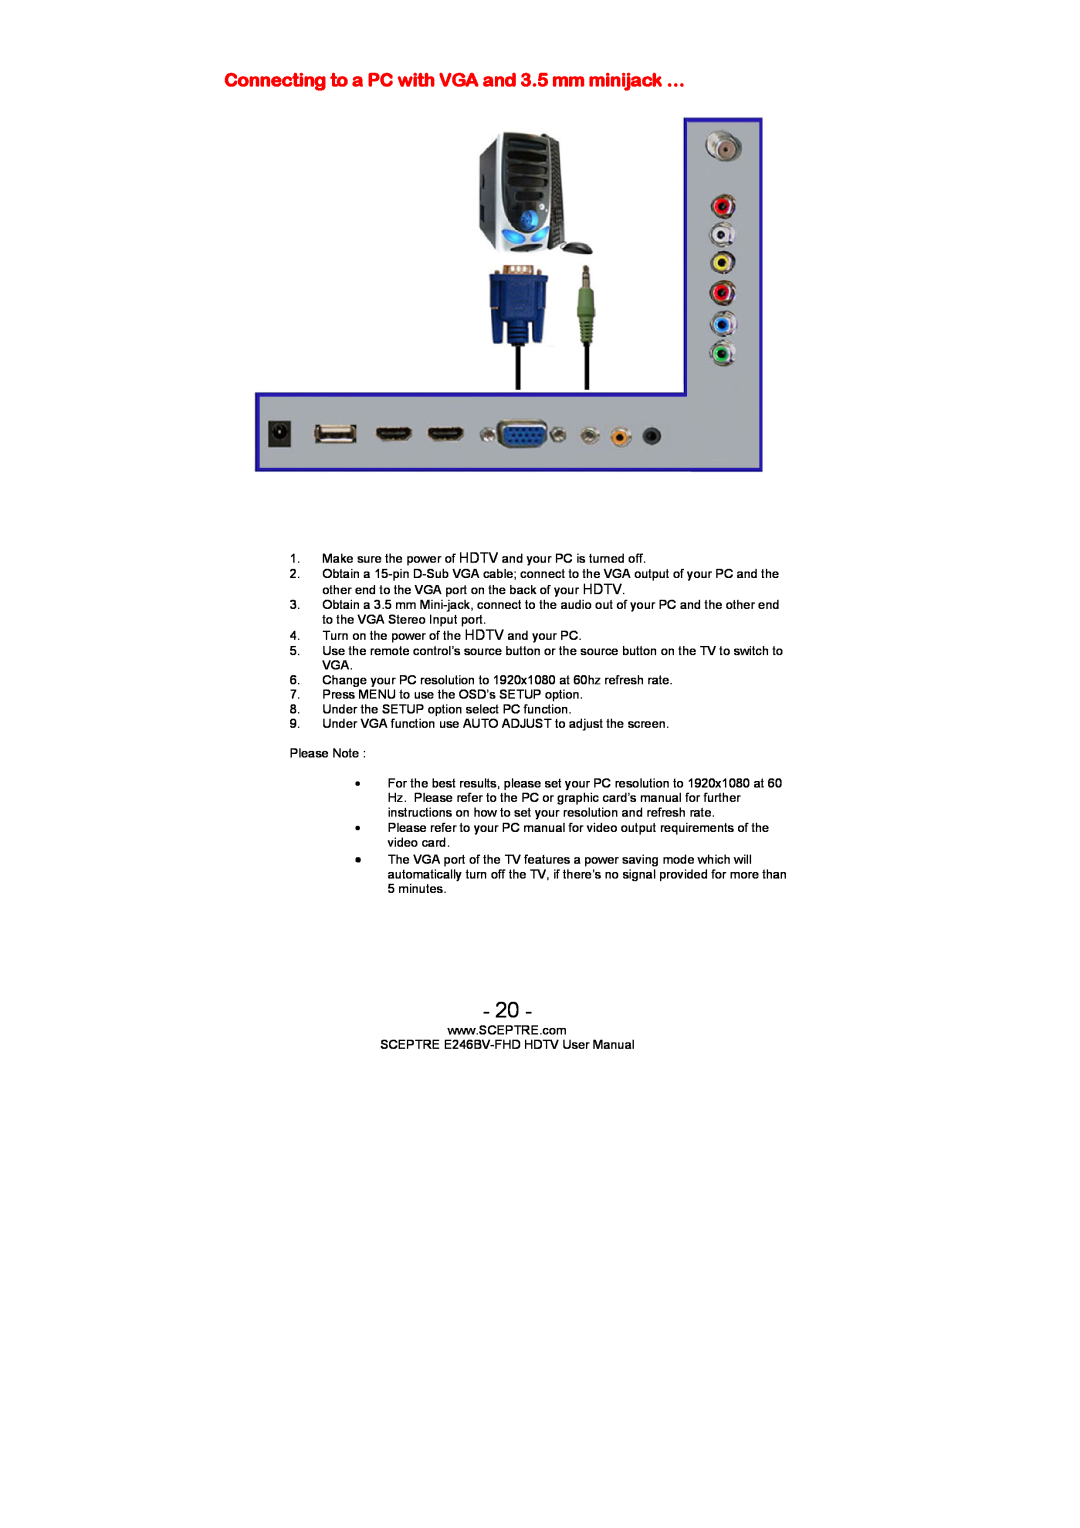 Sceptre Technologies E236BV-FHD, E246BV-FHD, LED HDTV user manual Connecting to a PC with VGA and 3.5 mm minijack … 